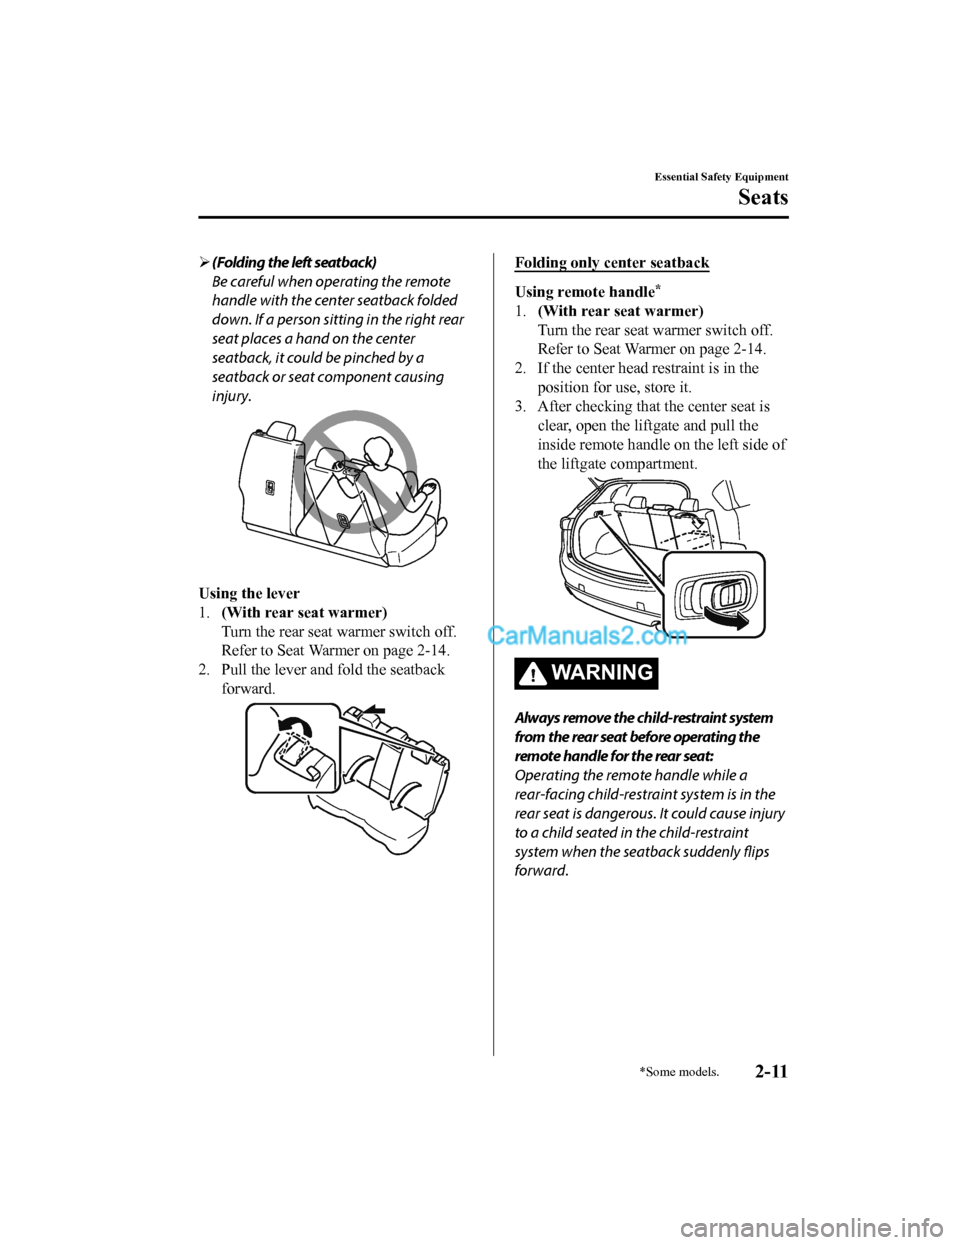 MAZDA MODEL CX-5 2018  Owners Manual (in English) (Folding the left seatback)
Be careful when operating the remote
handle with the center seatback folded
down. If a person sitting in the right rear
seat places a hand on the center
seatback, it cou